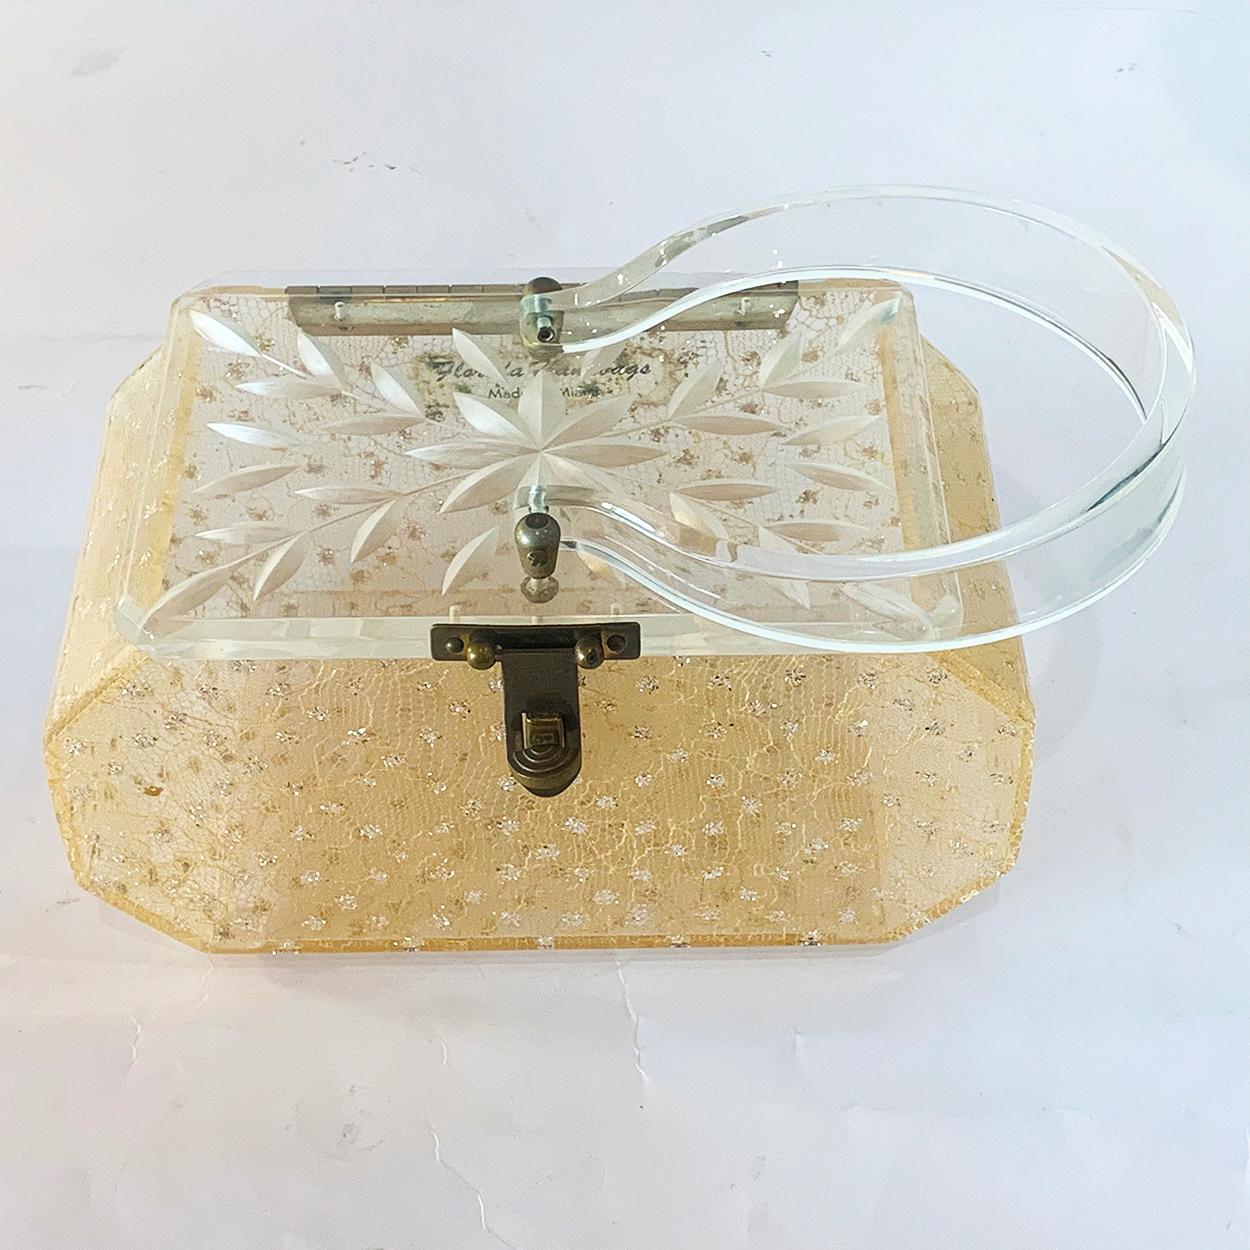 Mid Century Florida Handbag in the palest pink with “Gilt sparkles” in diagonals, within the Lace, set to Lucite, and a Carved, Diamond Leaf Carved, clear Lucite Lid and horseshoe shaped swing handle on perfect bronze domed posts, with bronze pins